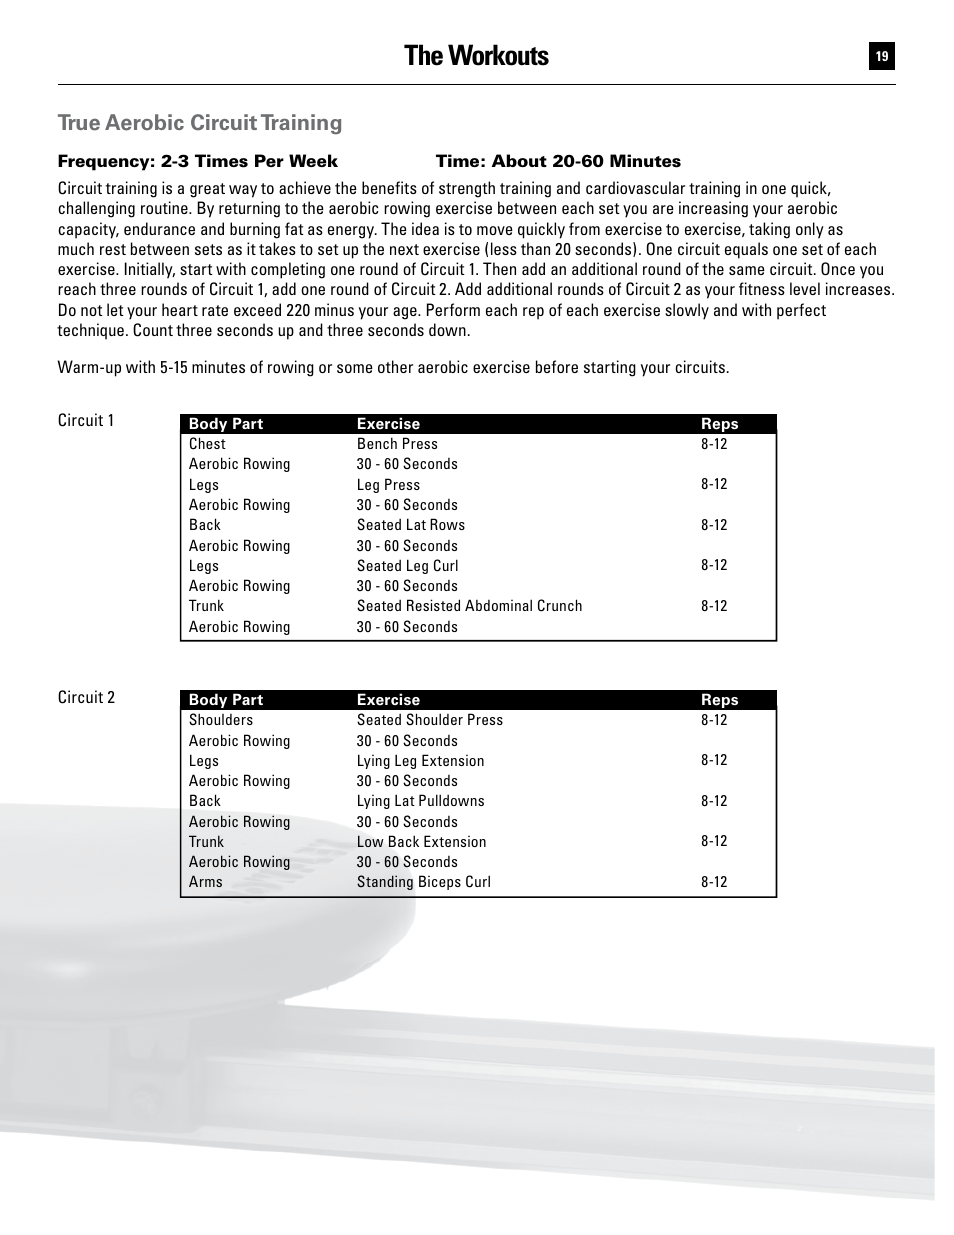 The workouts, True aerobic circuit training | Bowflex Ultimate User Manual | Page 19 / 110